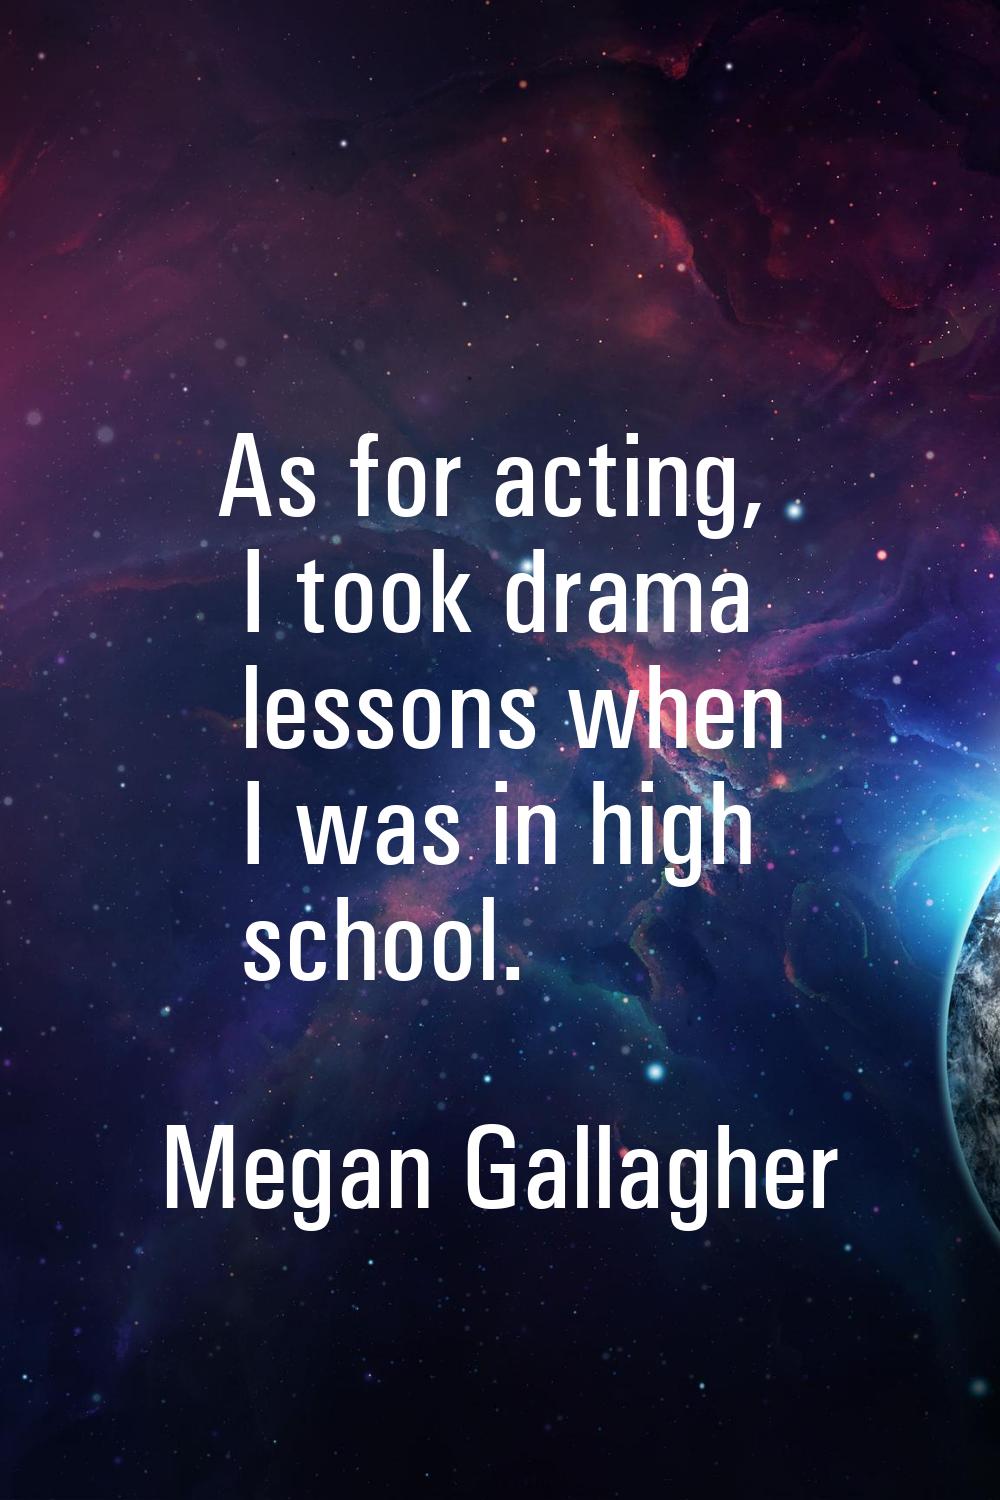 As for acting, I took drama lessons when I was in high school.